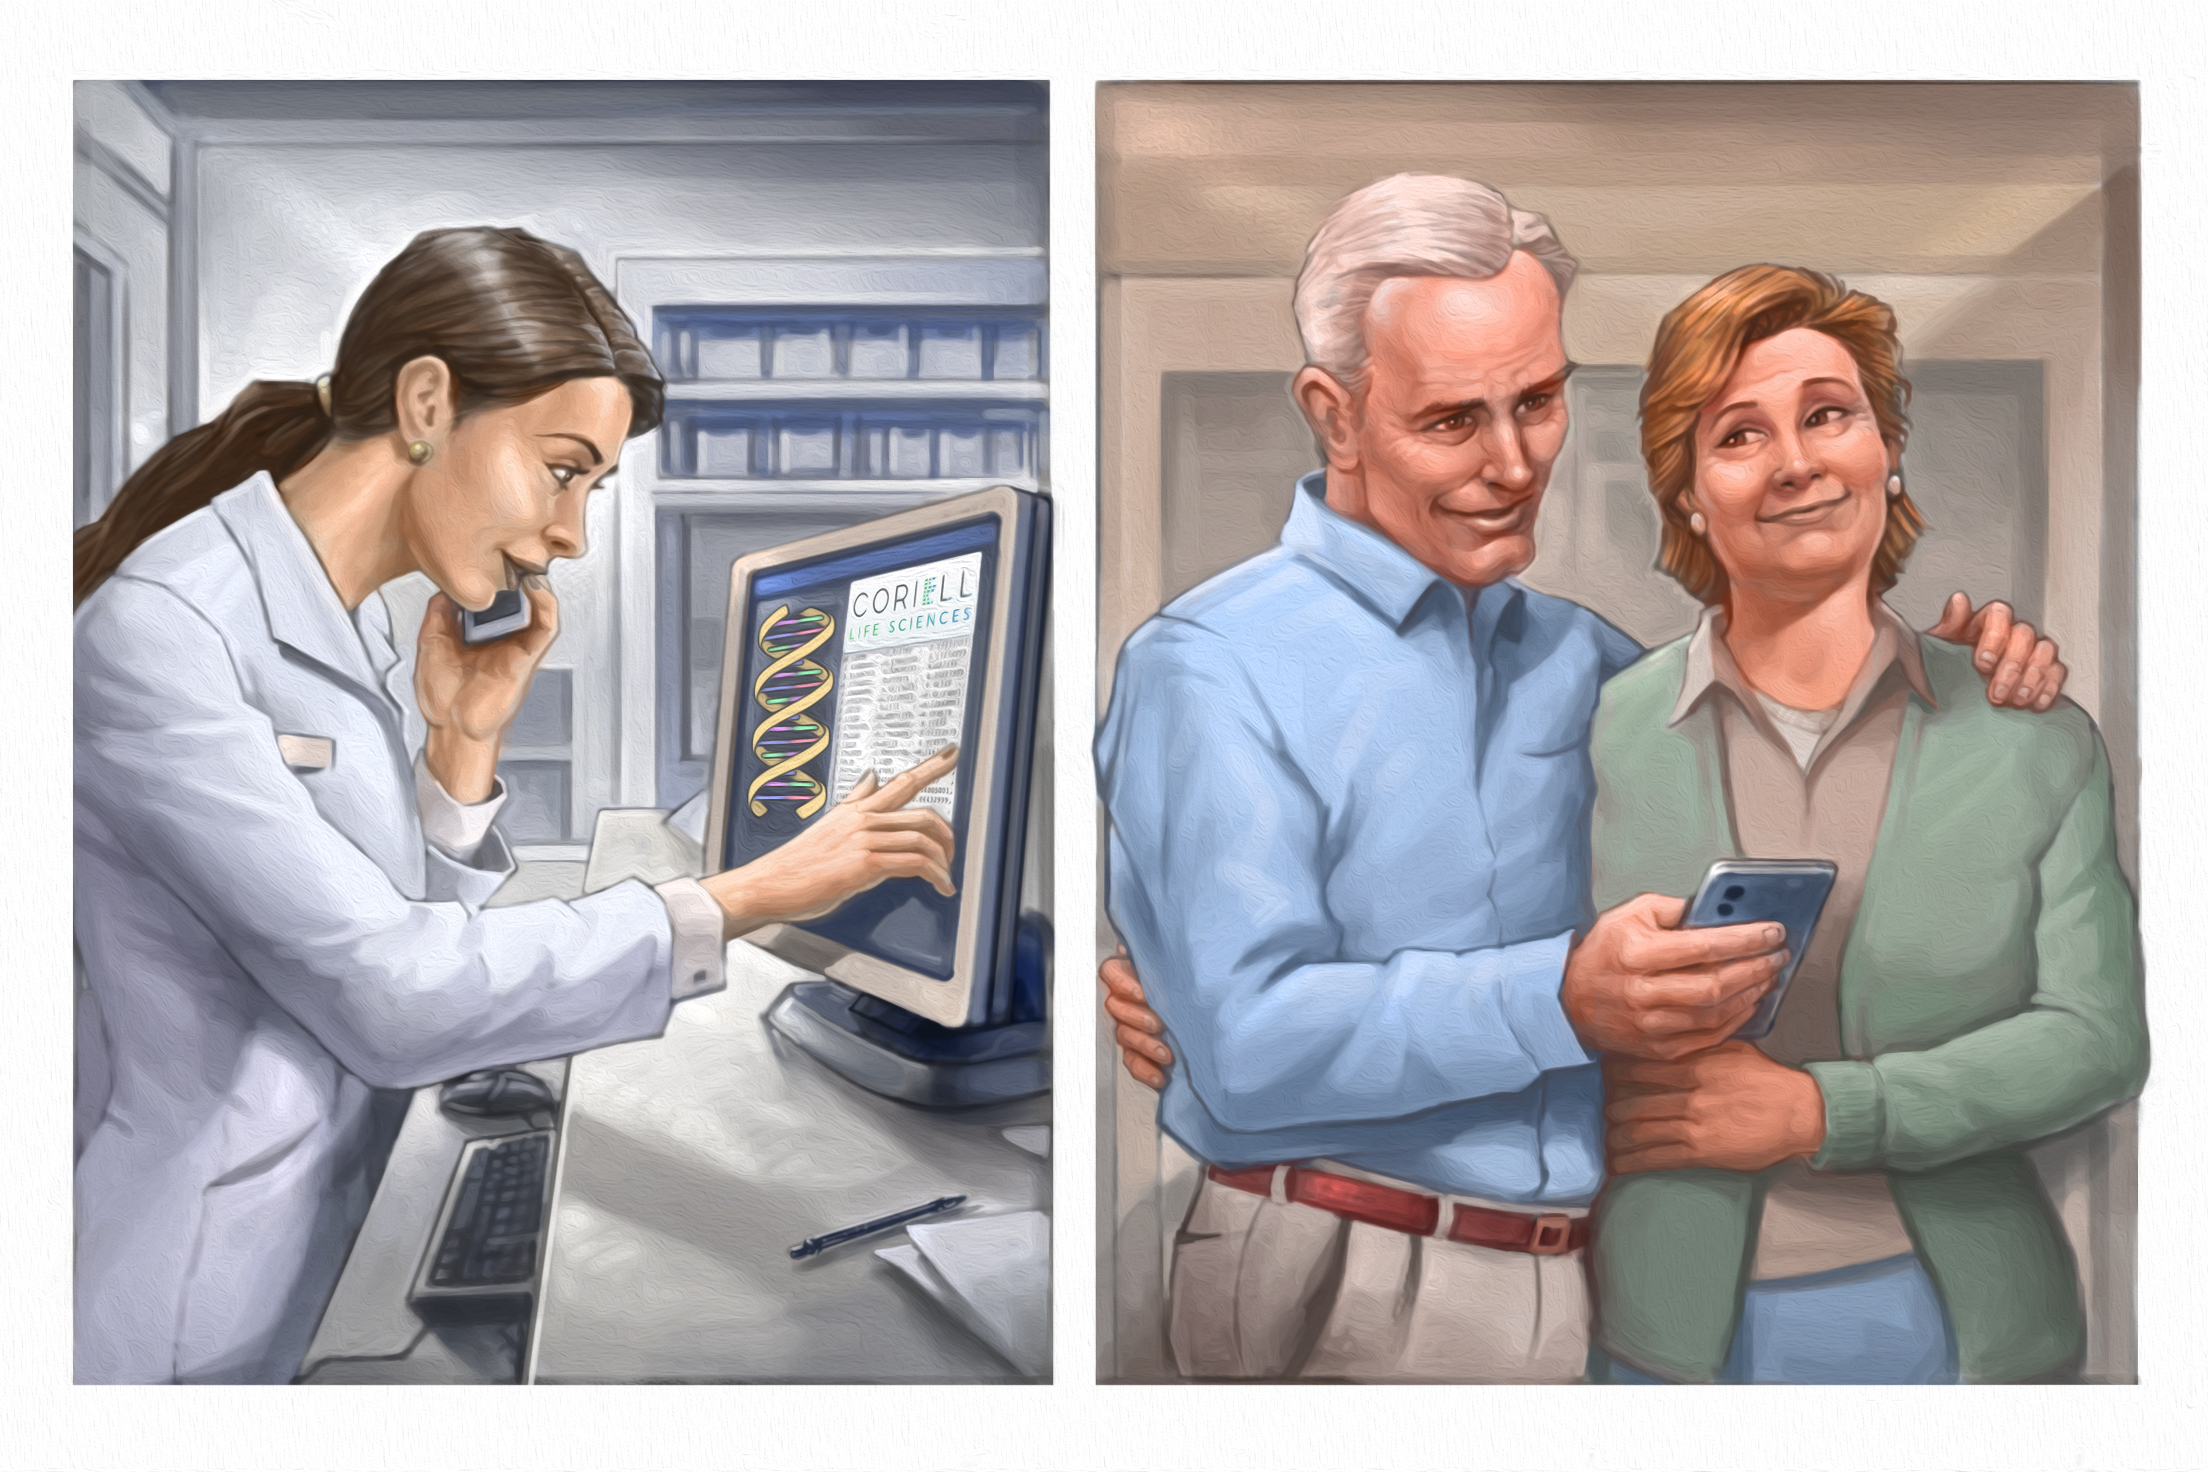 Coriell Life Sciences' Healthy Aging Illustration featuring a pharmacist and patients